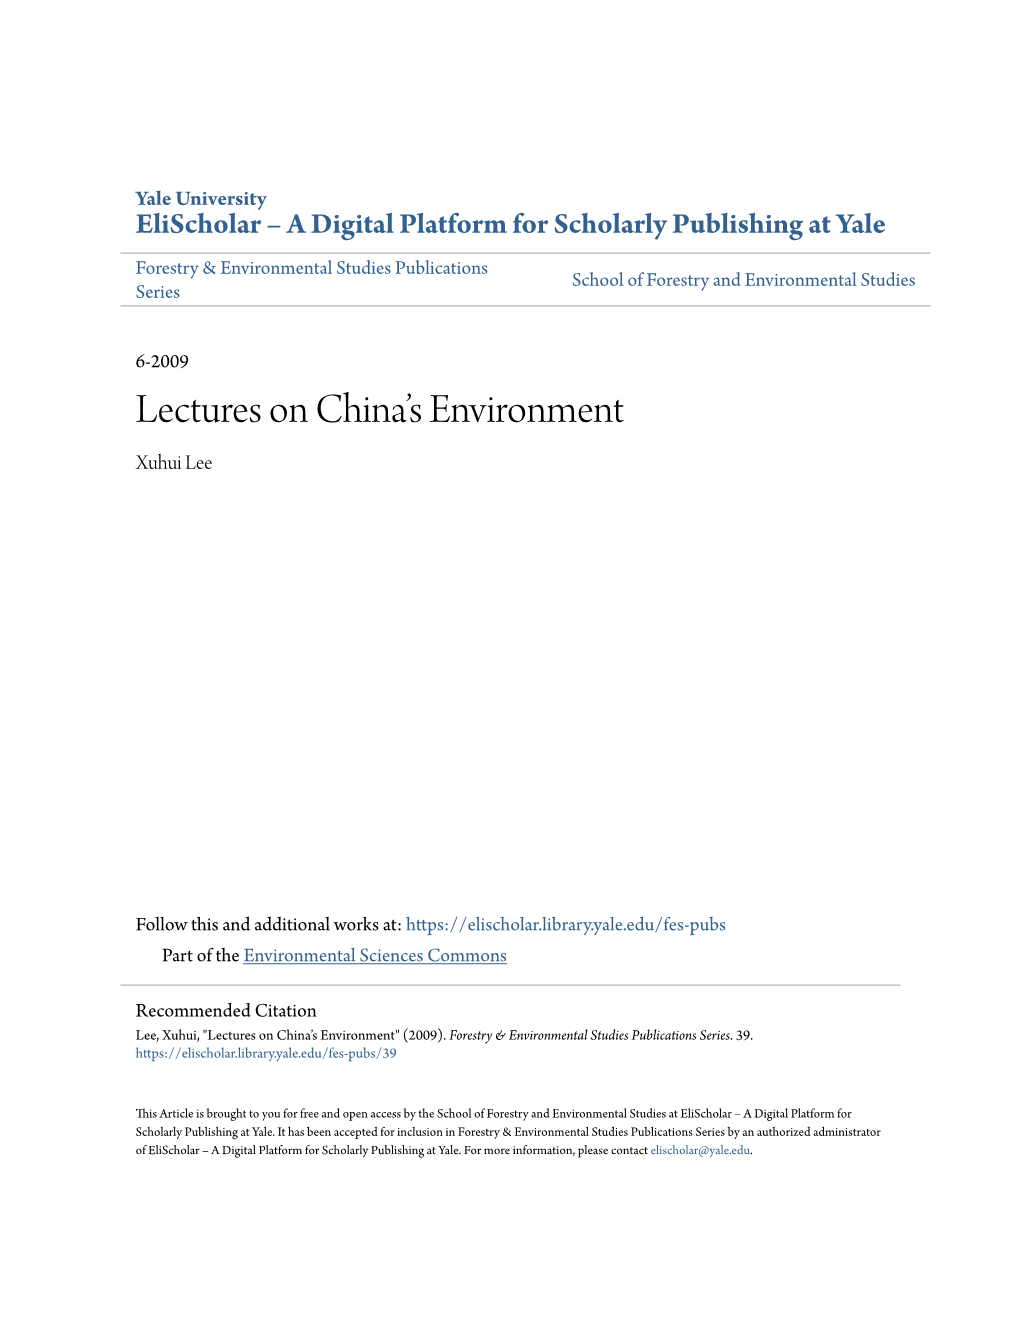 Lectures on China's Environment